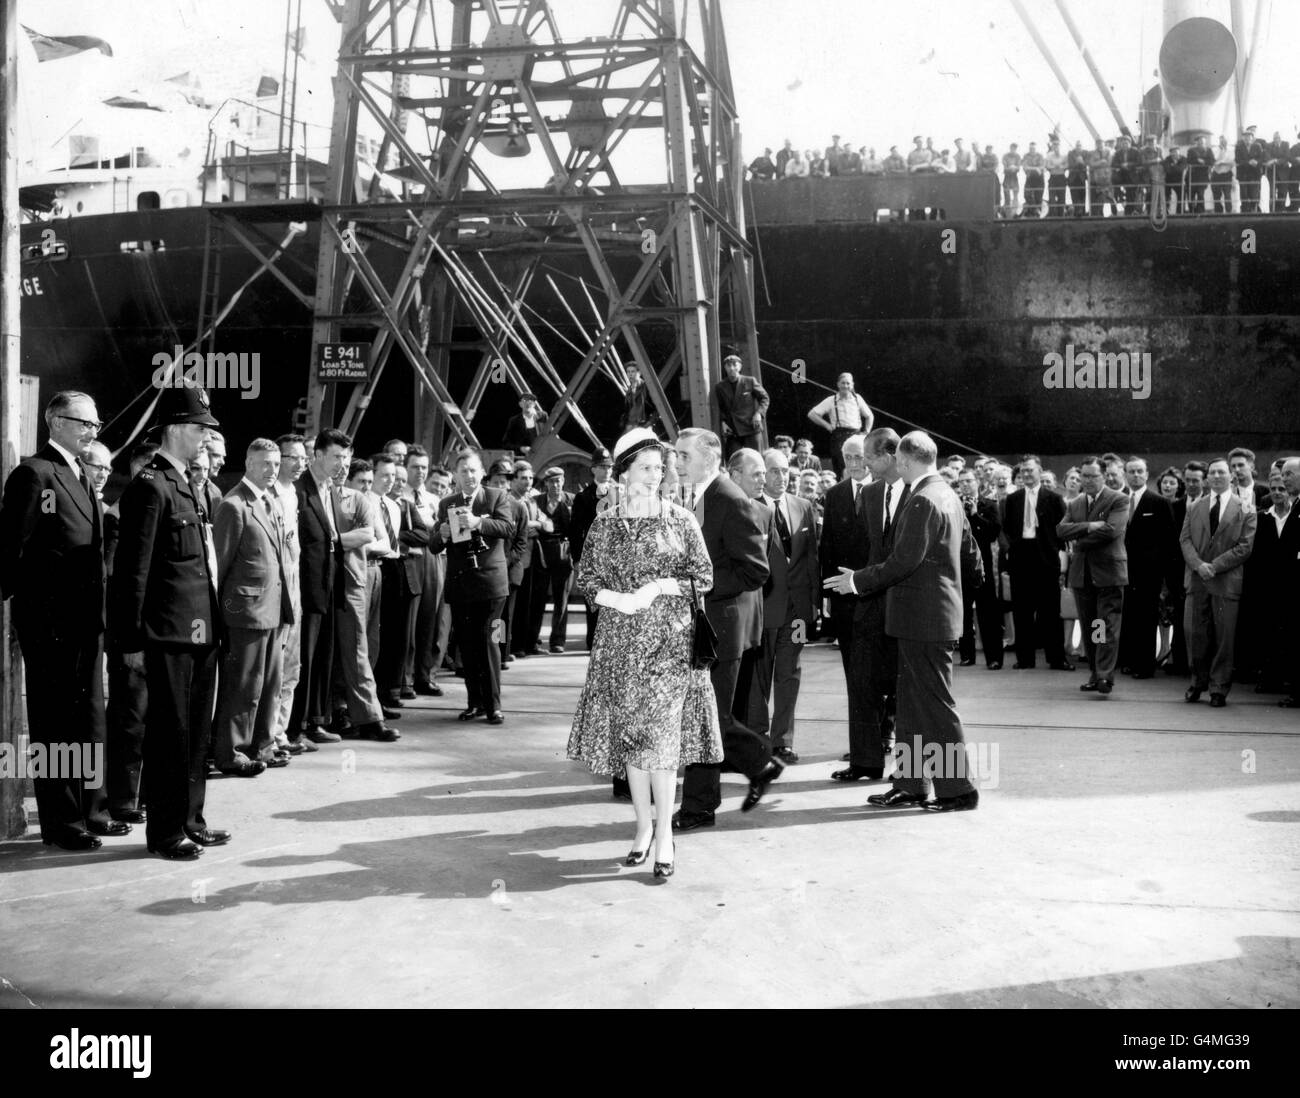 Men line the rail of the ship to share a view of the Queen at the Royal Albert Dock, London, during her visit to the Port of London with the Duke of Edinburgh. Stock Photo